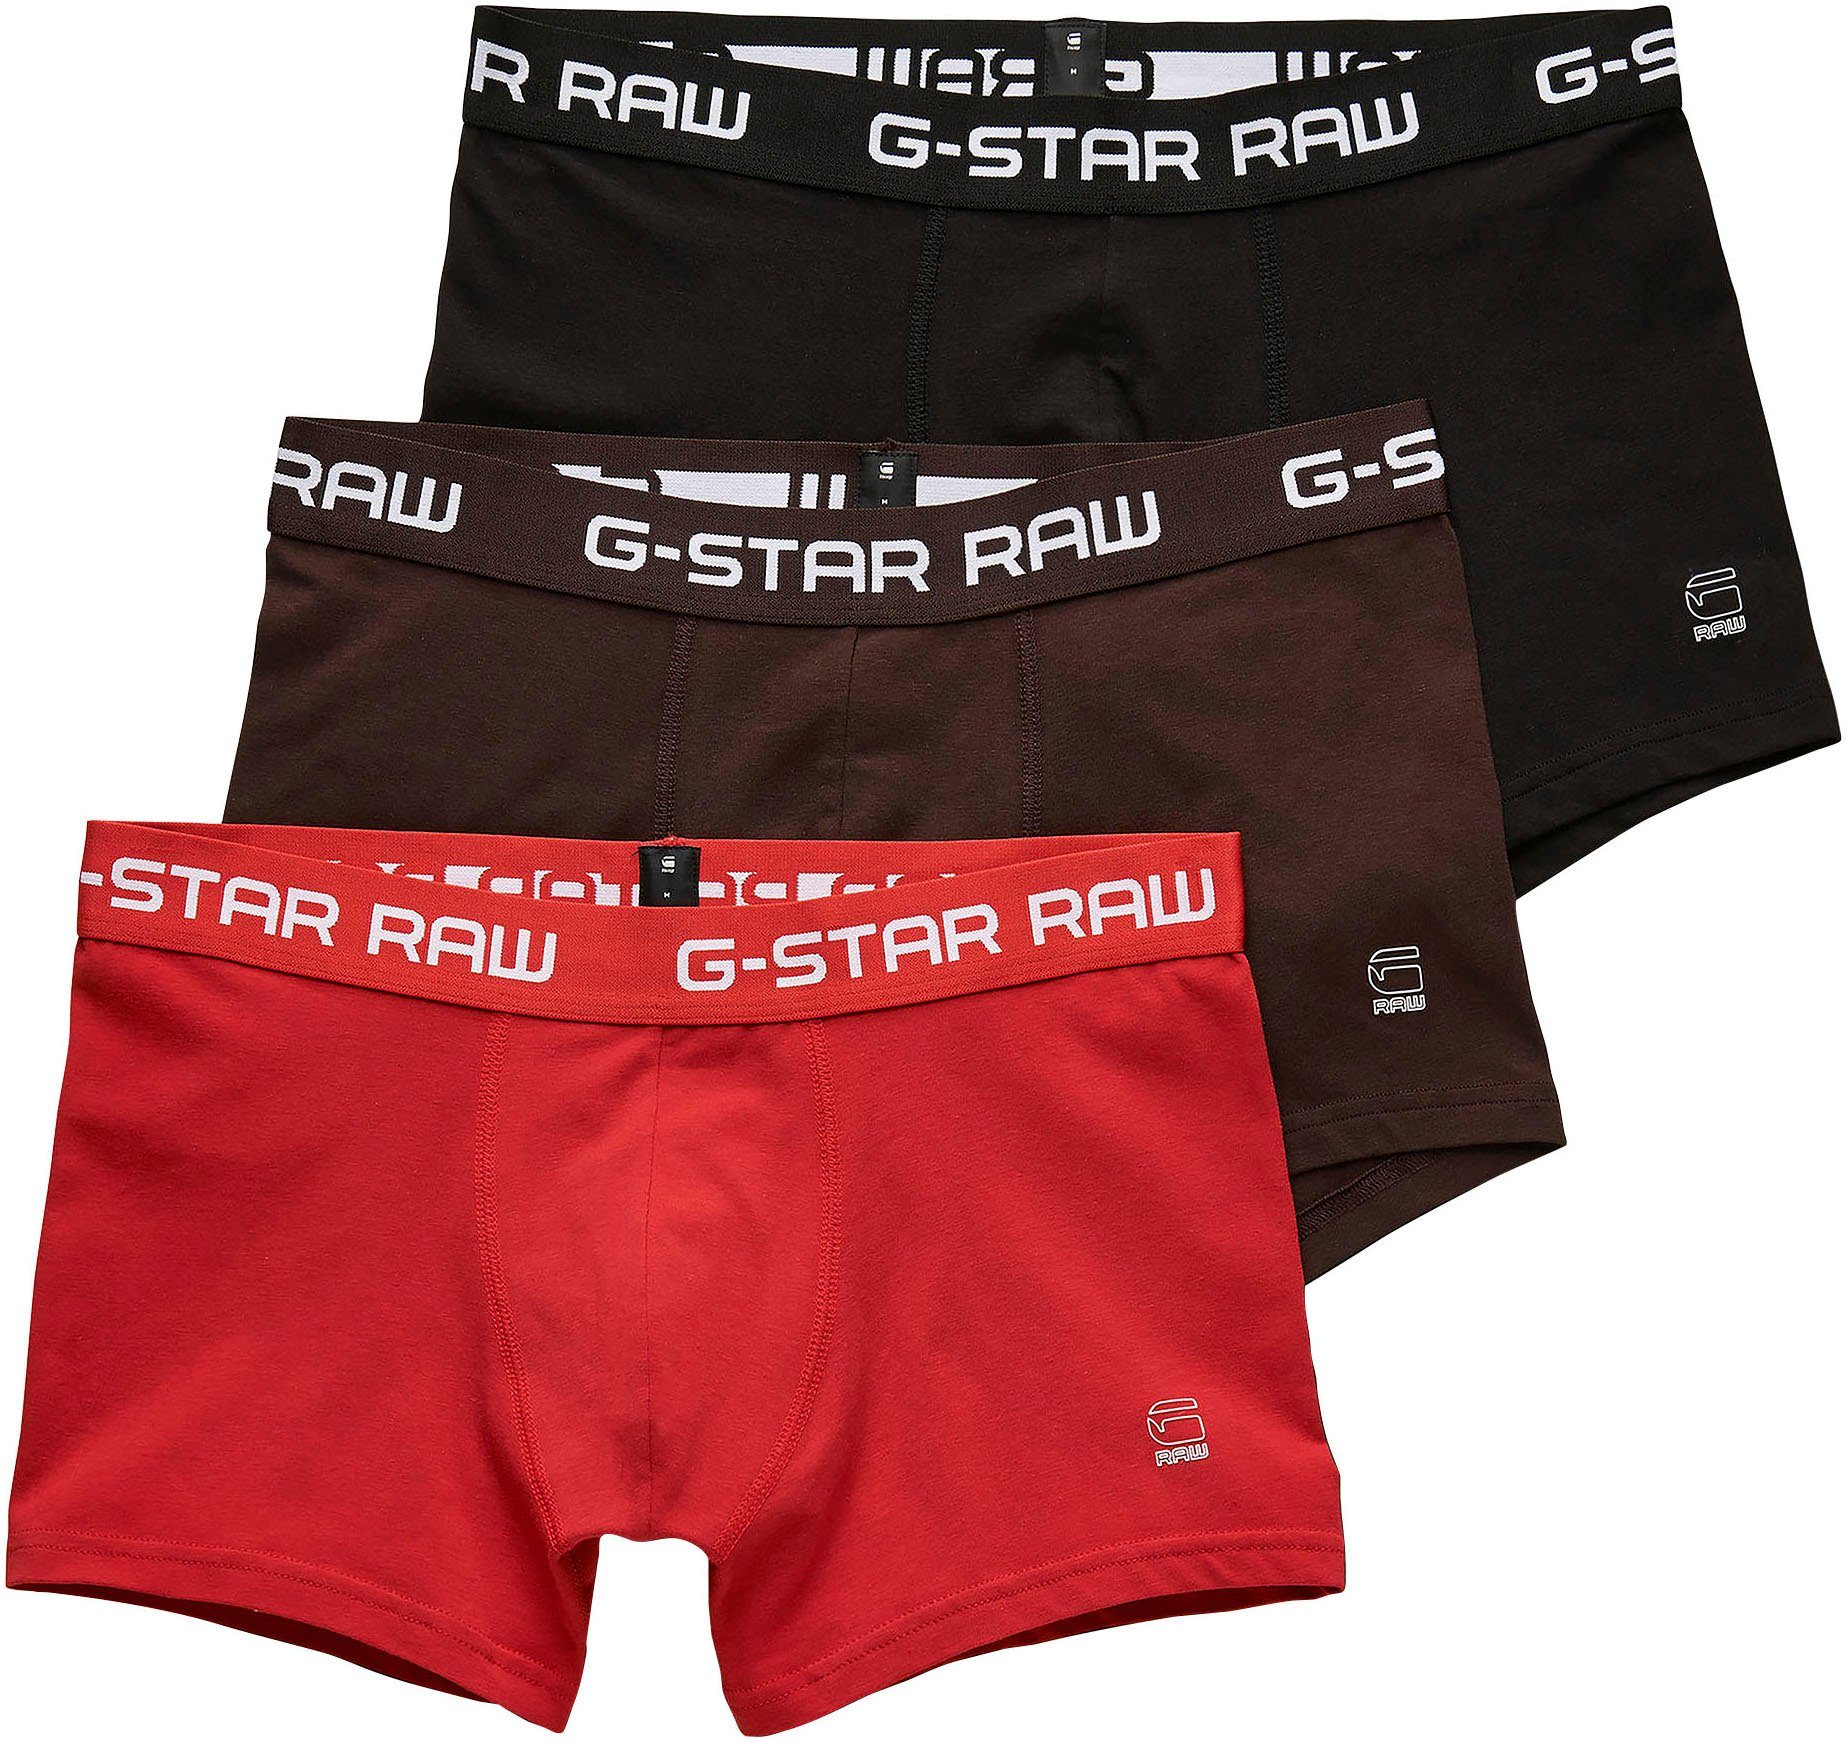 G-Star RAW Boxer Classic trunk (Packung, 3er-Pack) 3-St., 3 bordeaux, rot, clr schwarz pack